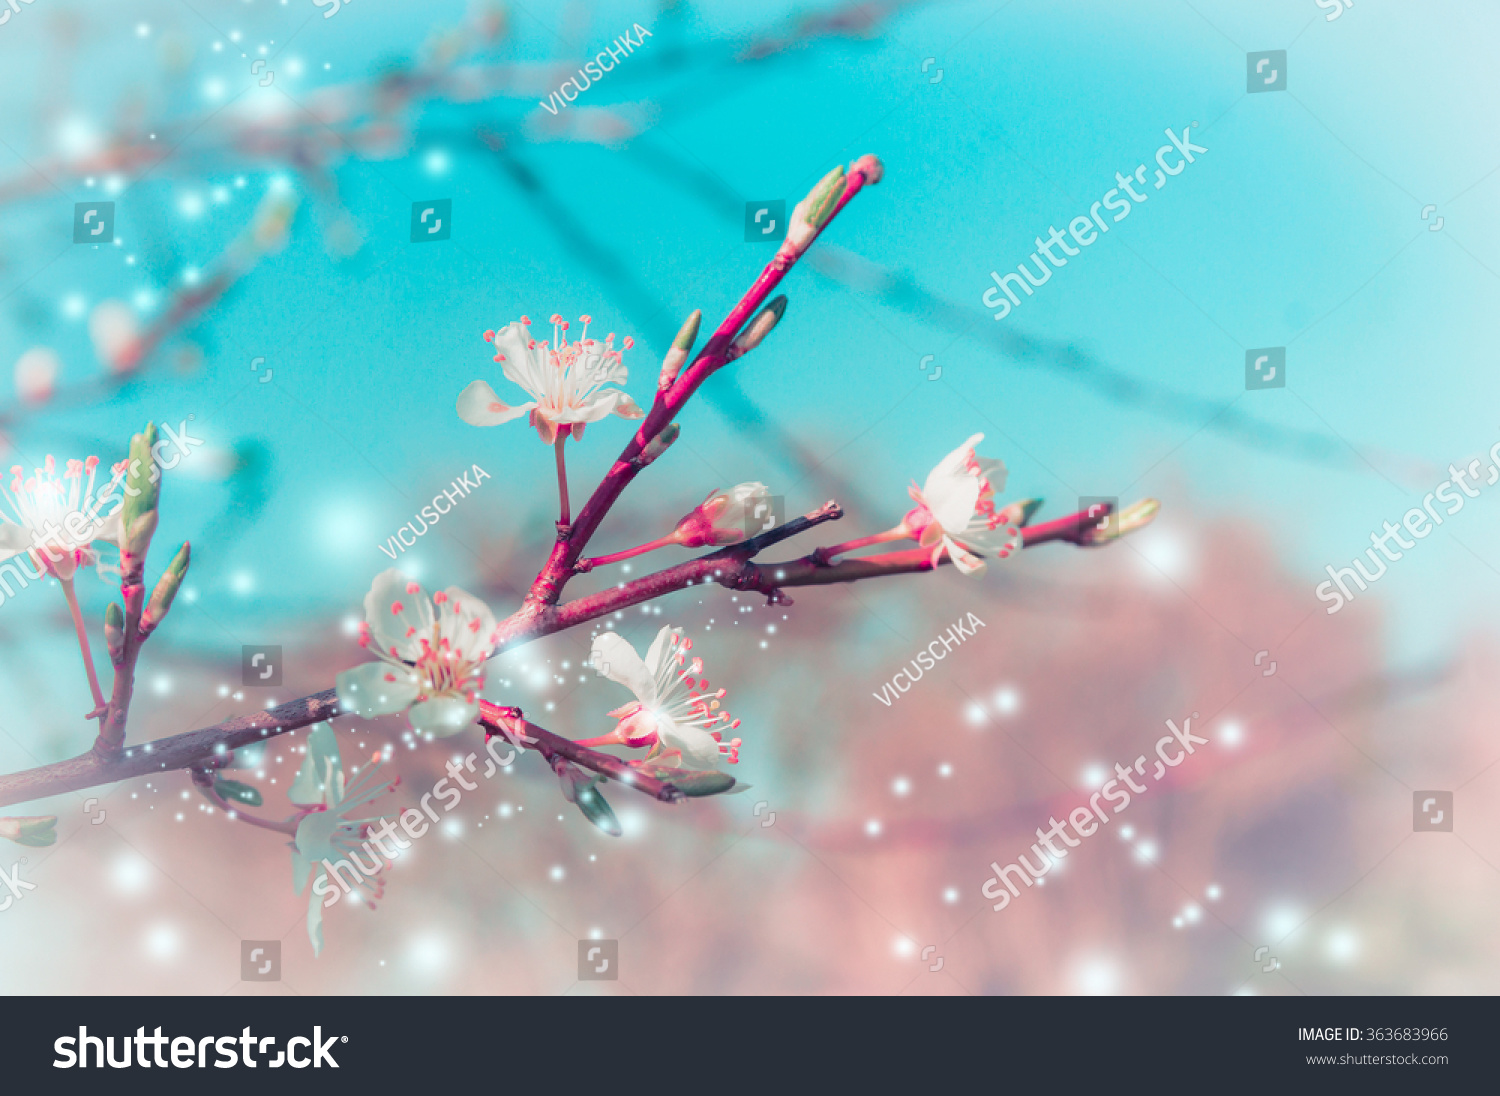 Spring nature background with tree blossom branches in park or garden #363683966